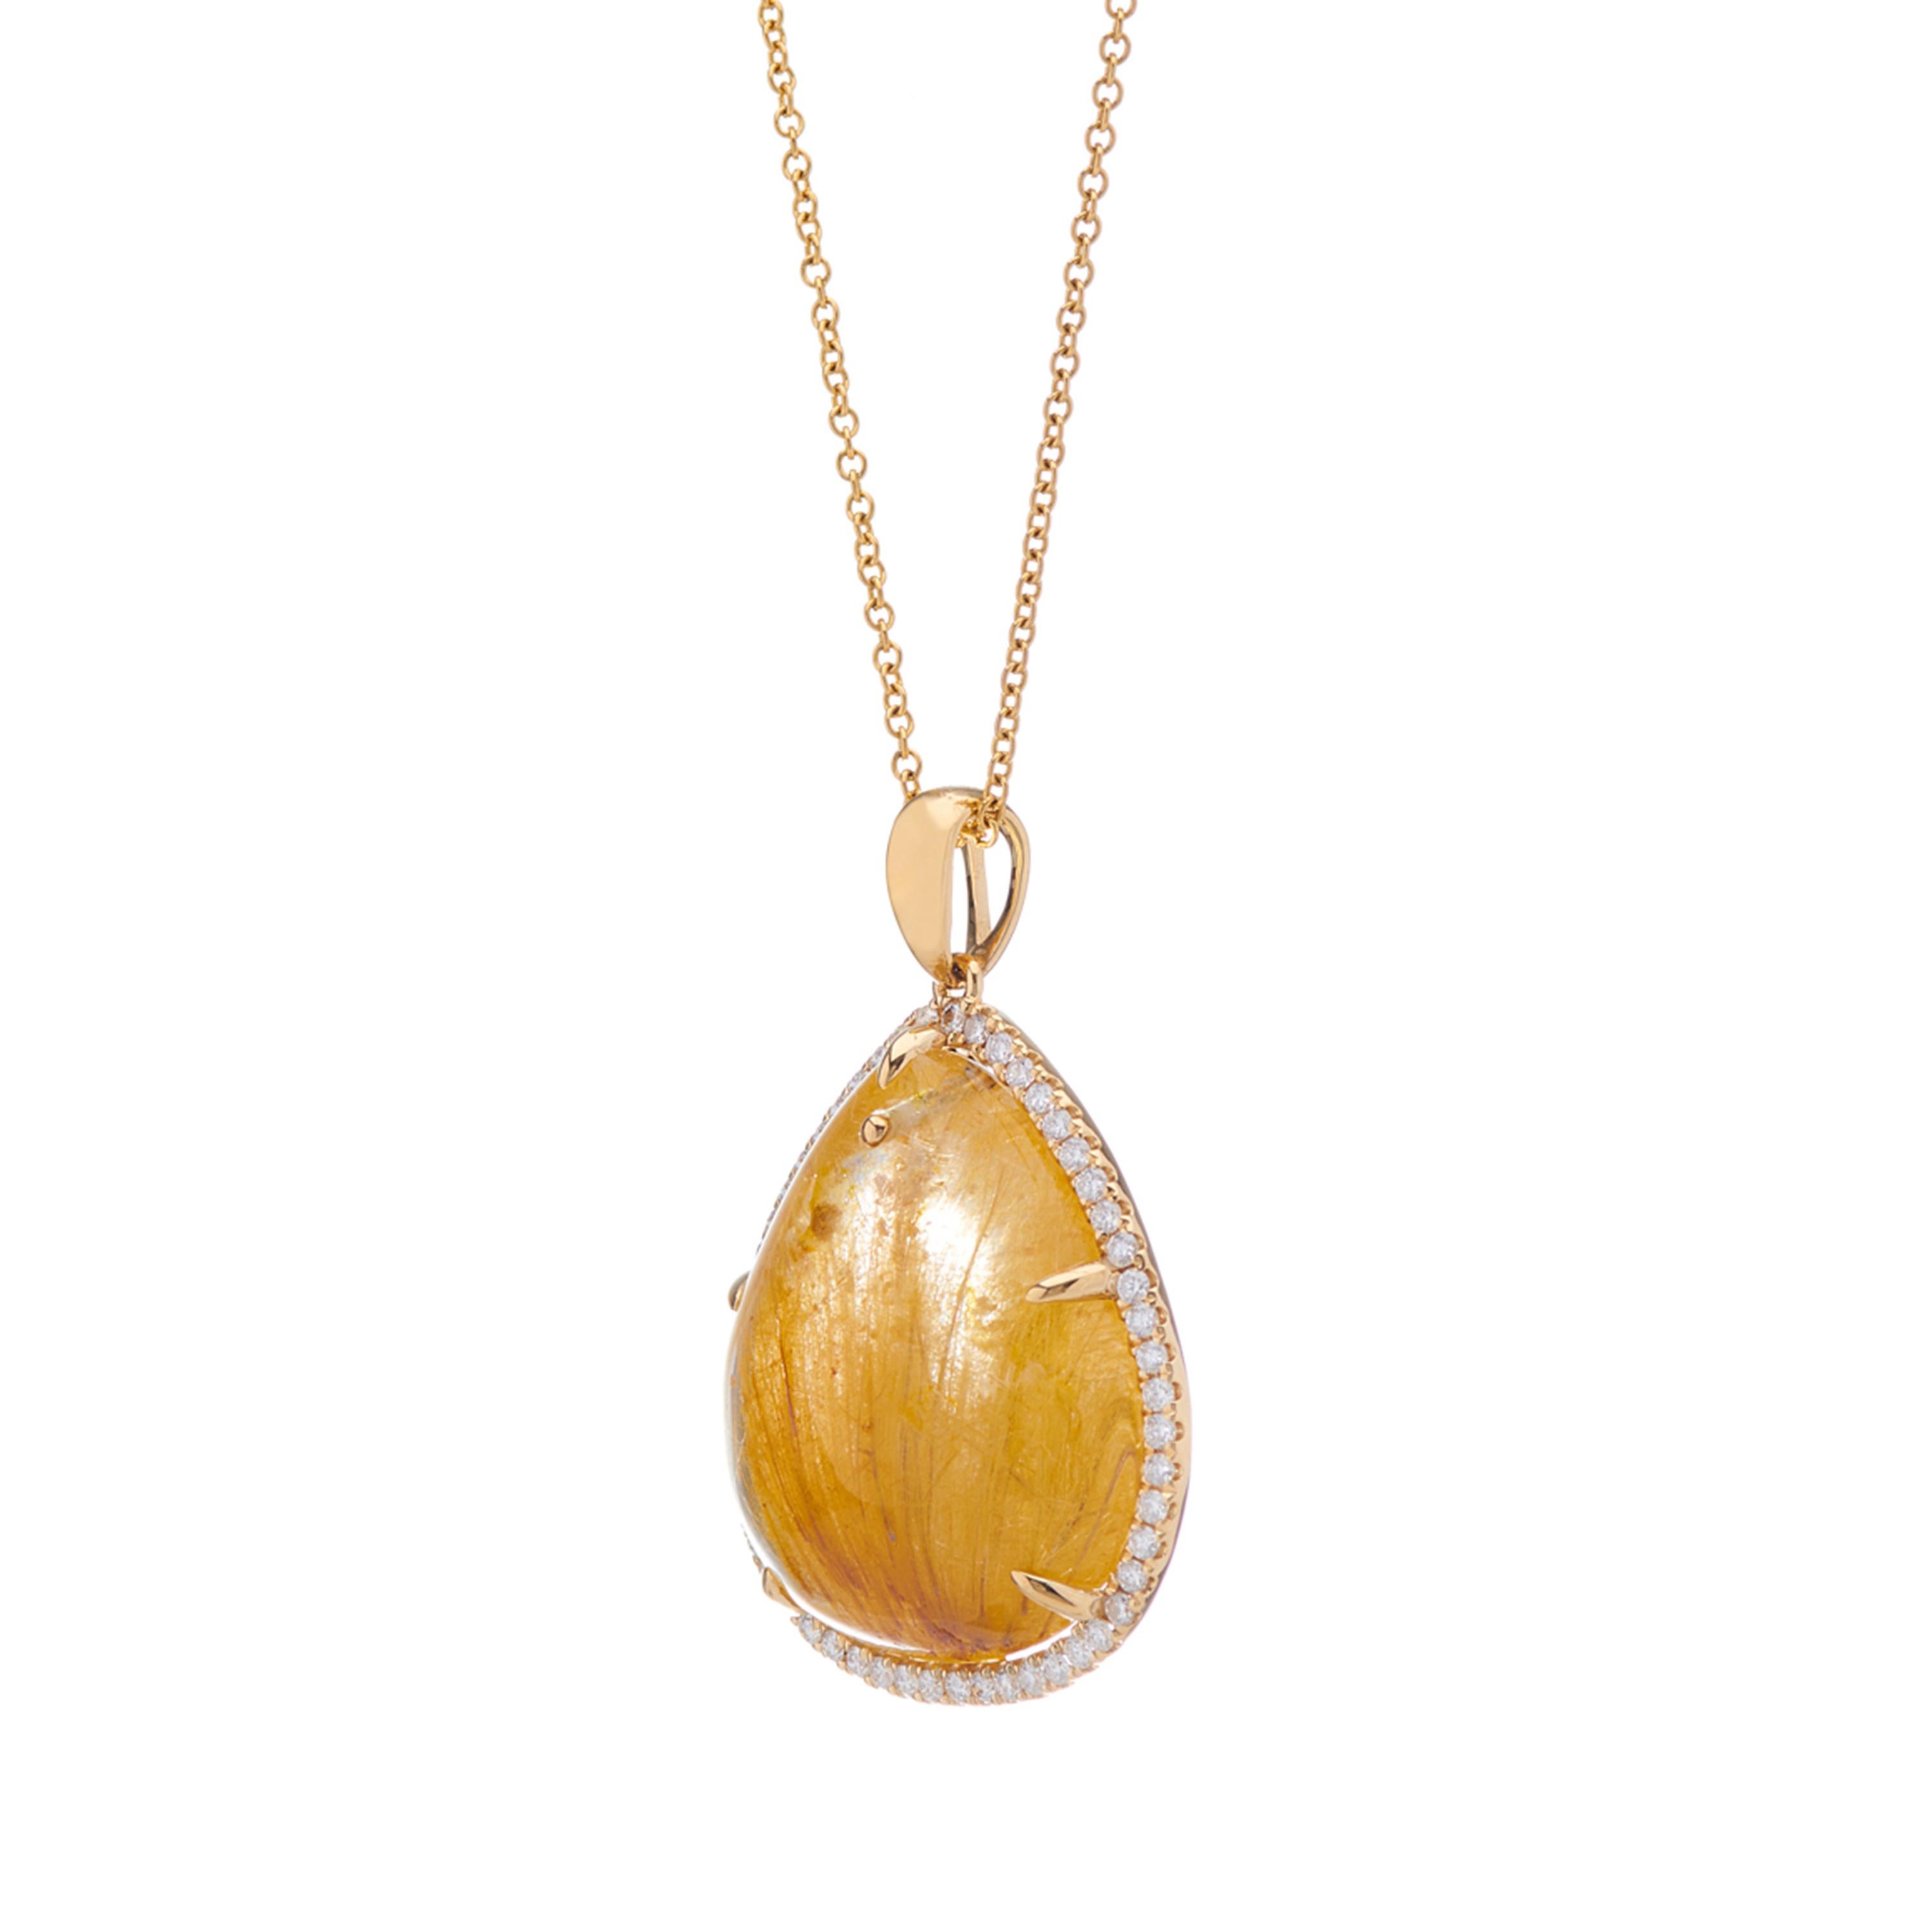 Description:
Made-to-order asymmetric ~30.6ct rutilated quartz pendant, bordered with brilliant diamonds with a combined weight of ~0.391ct and set in 18 karat yellow gold. 

